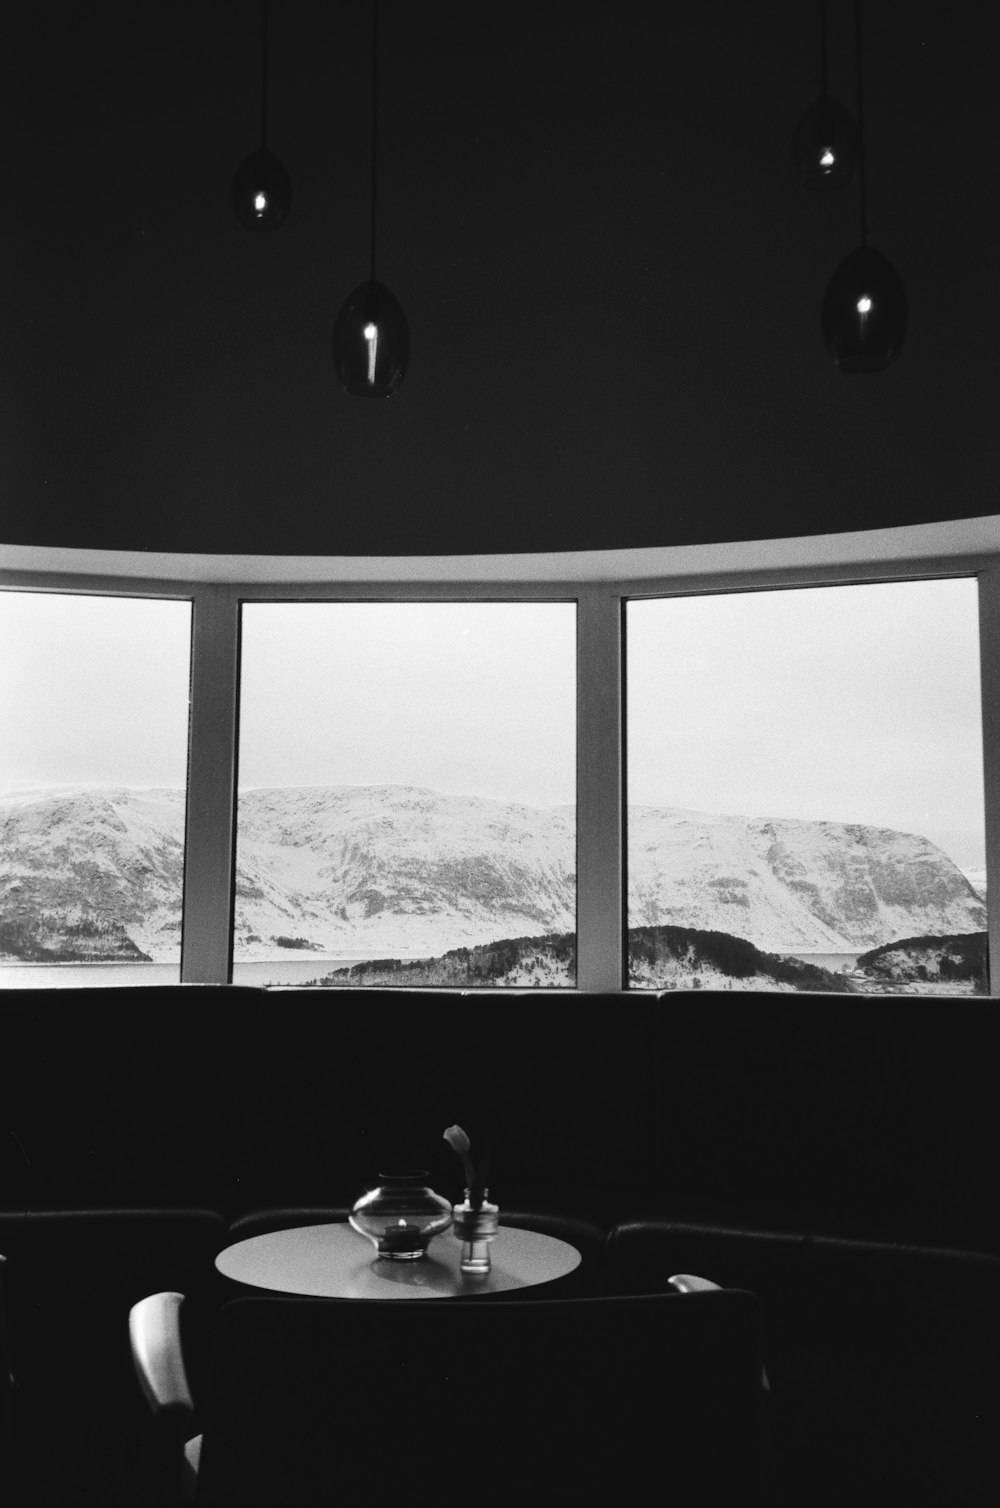 a black and white photo of a table and a window